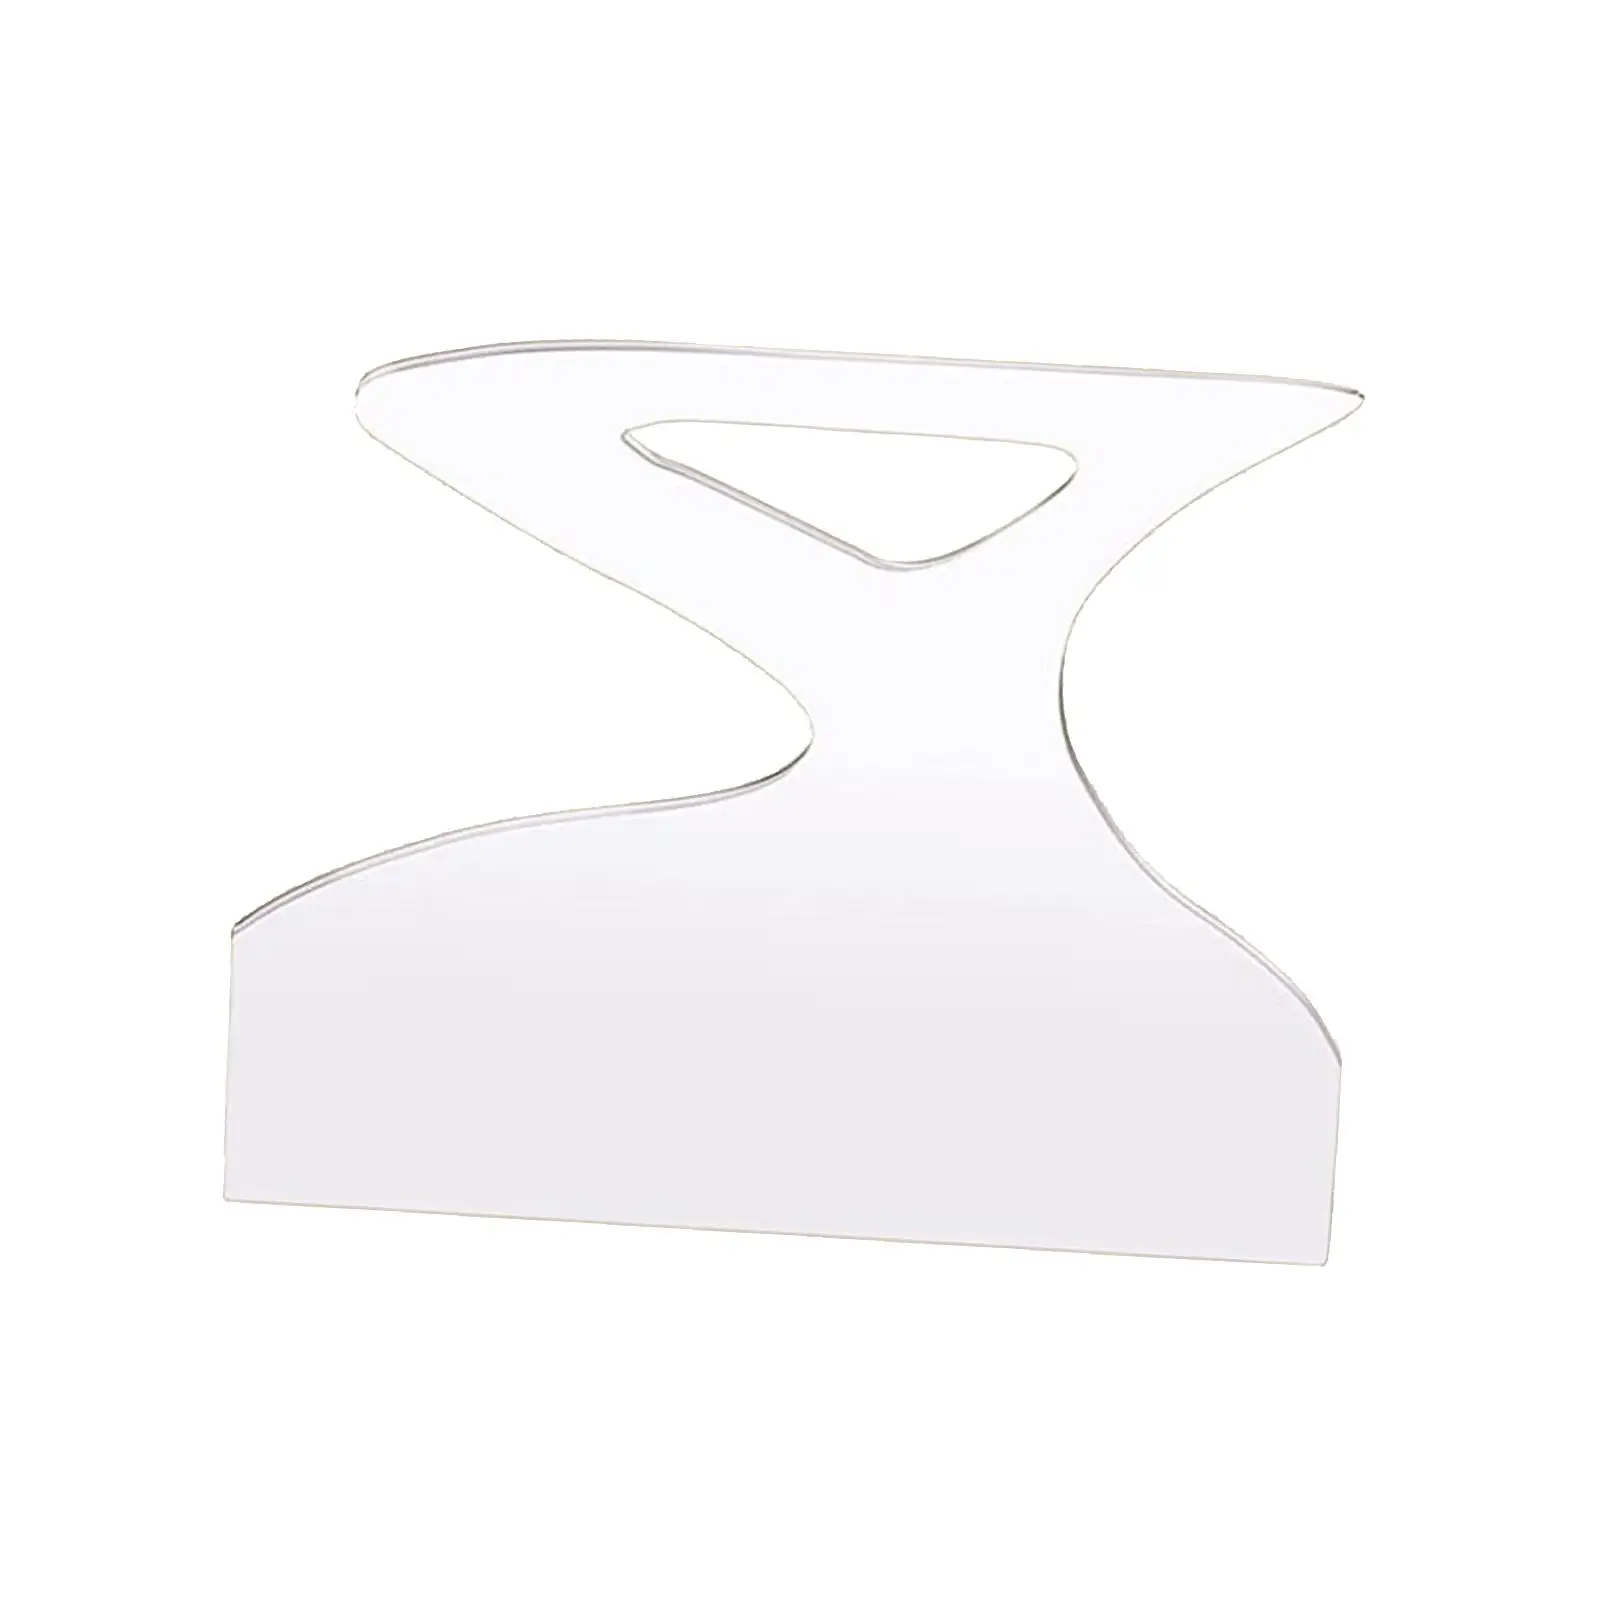 Acrylic Cutting Board Handle Router Template Acrylic Handle Templates Woodworking Router Template Clear Cutting Board Router